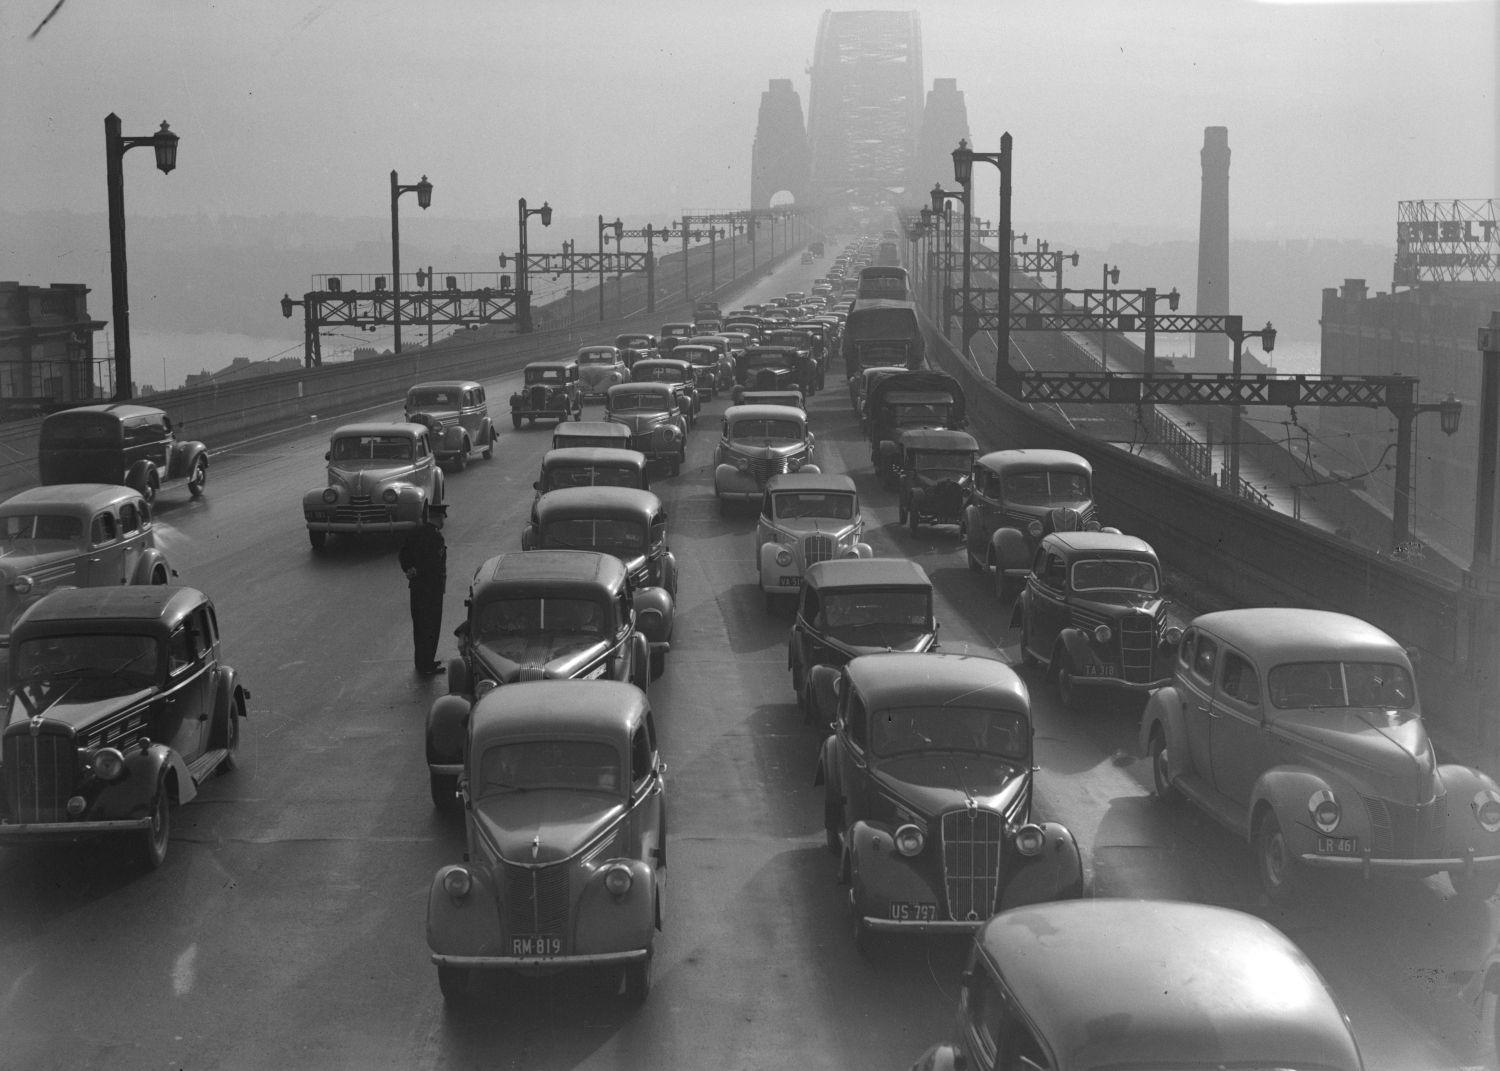 1947 photo showing cars on driving along the Sydney Harbour Bridge